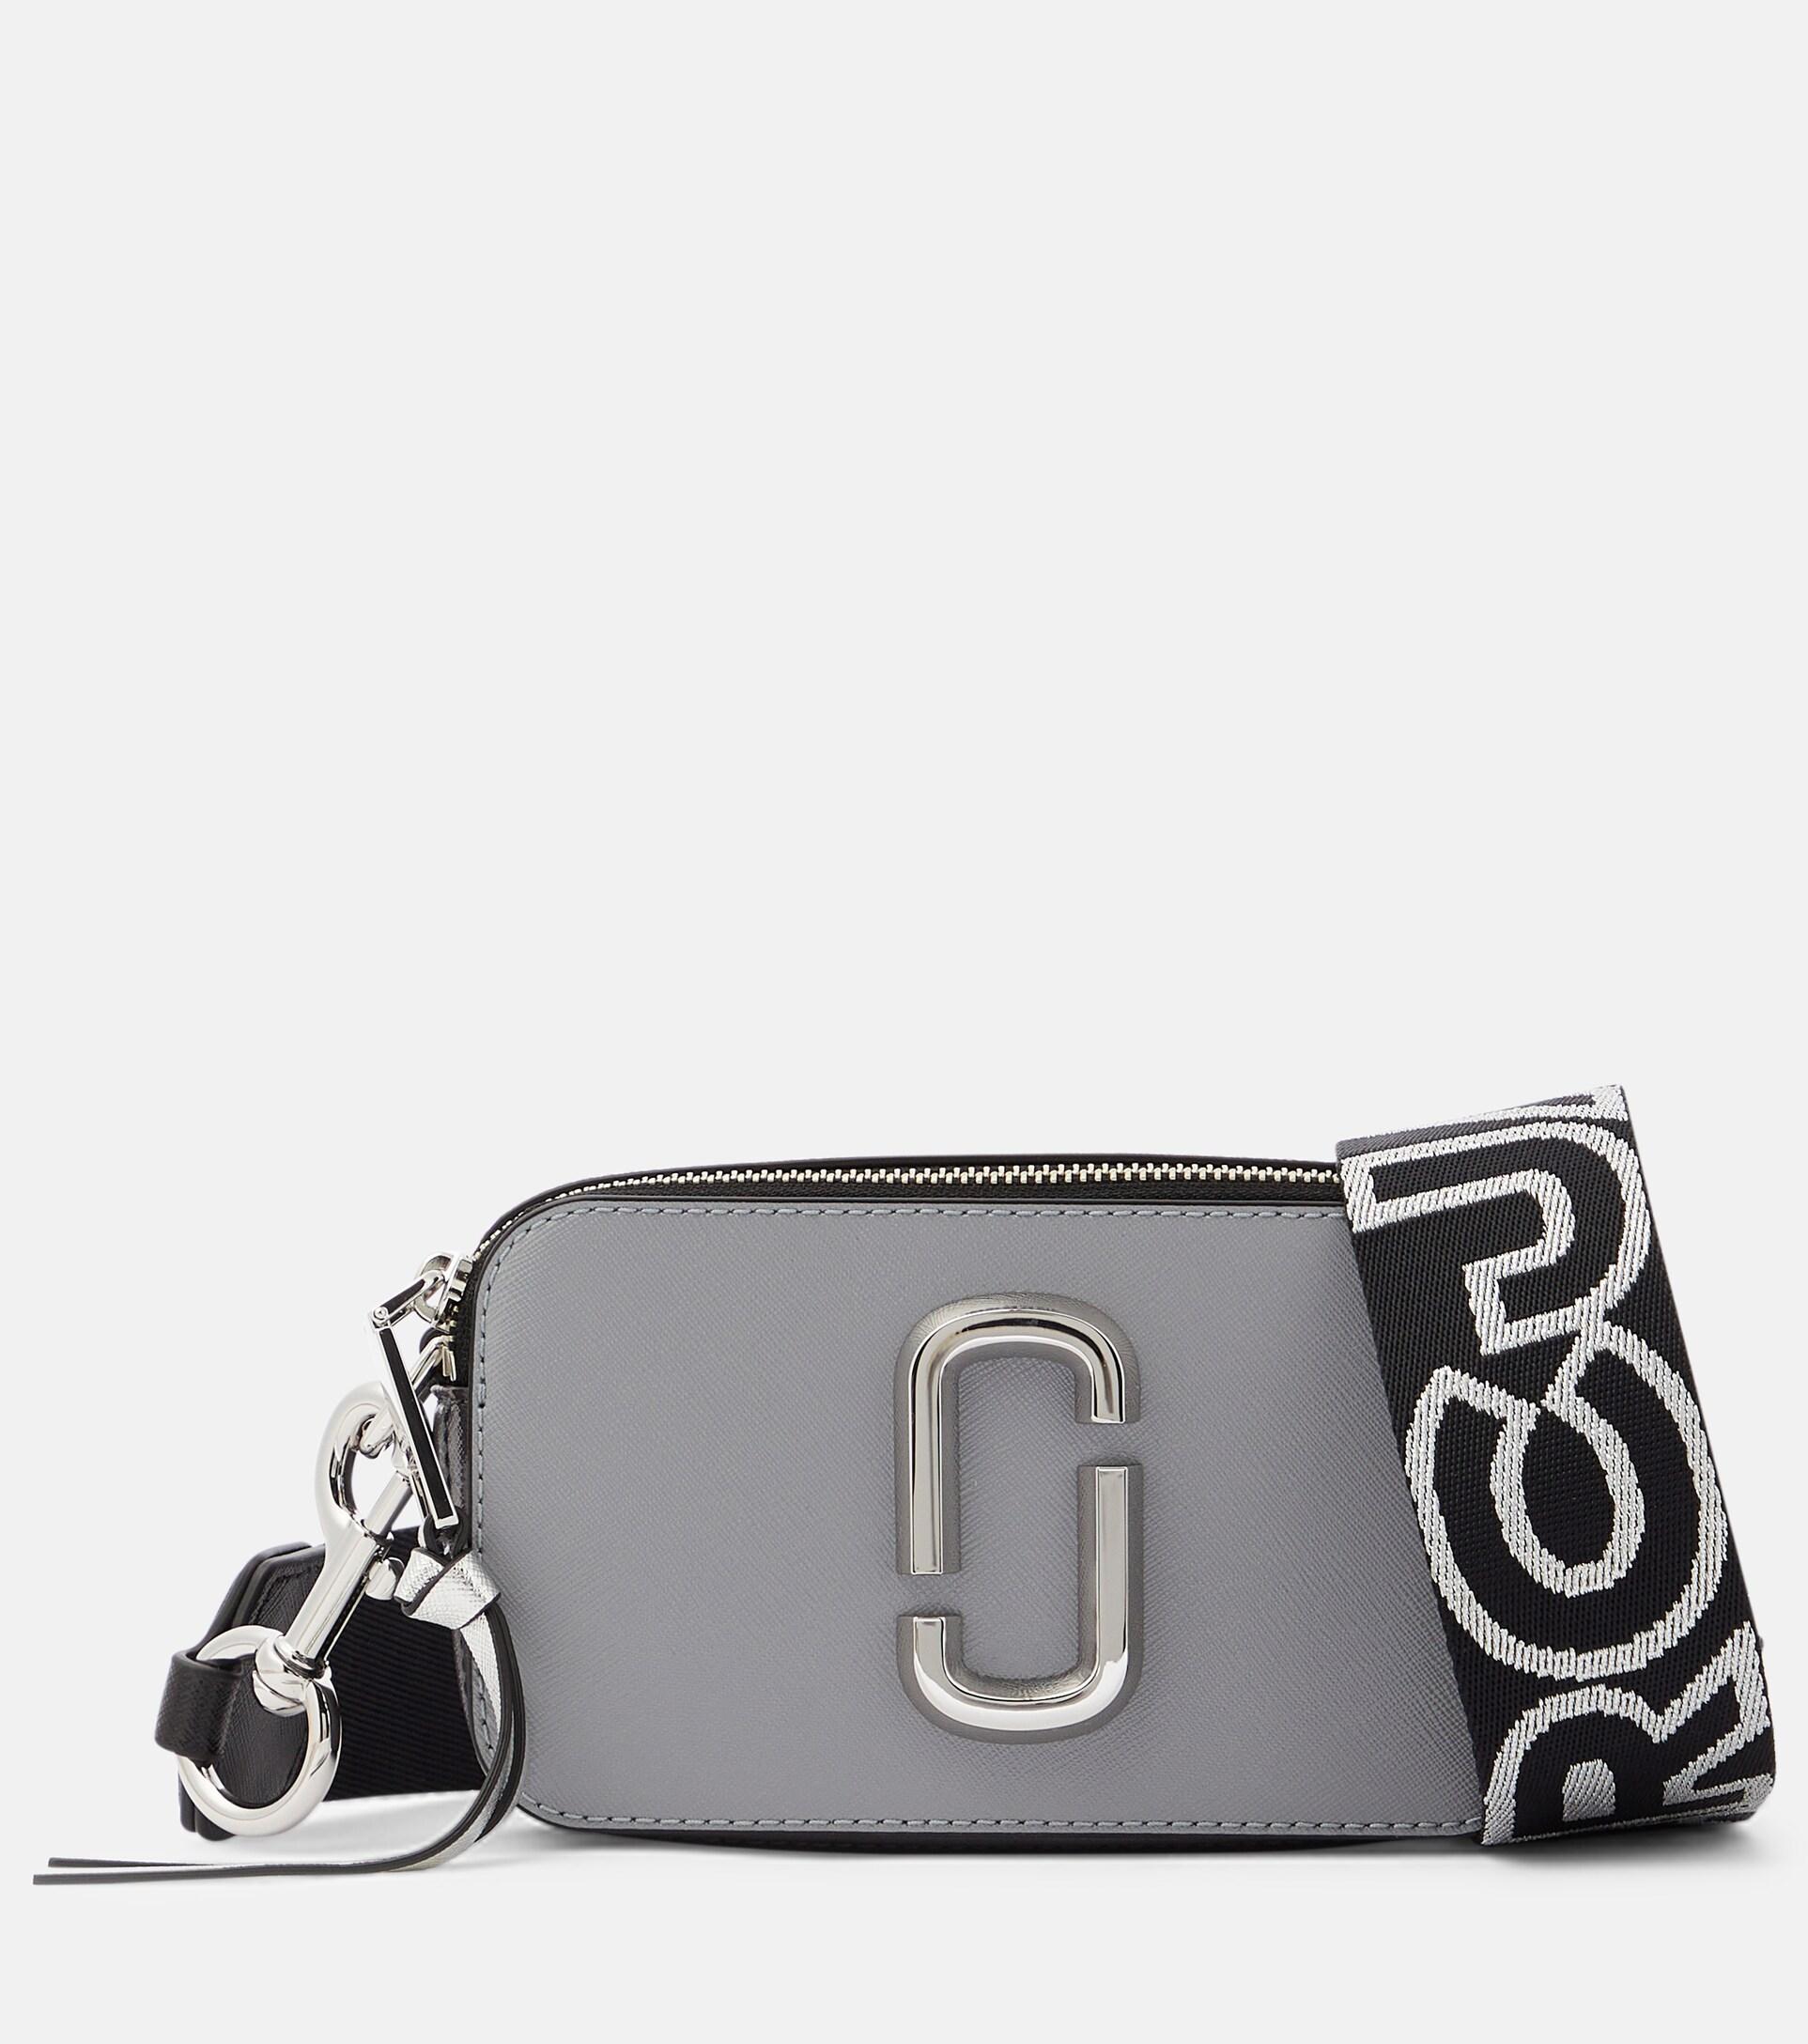 Marc Jacobs Snapshot Small Camera Bag- French Grey/ Multi 